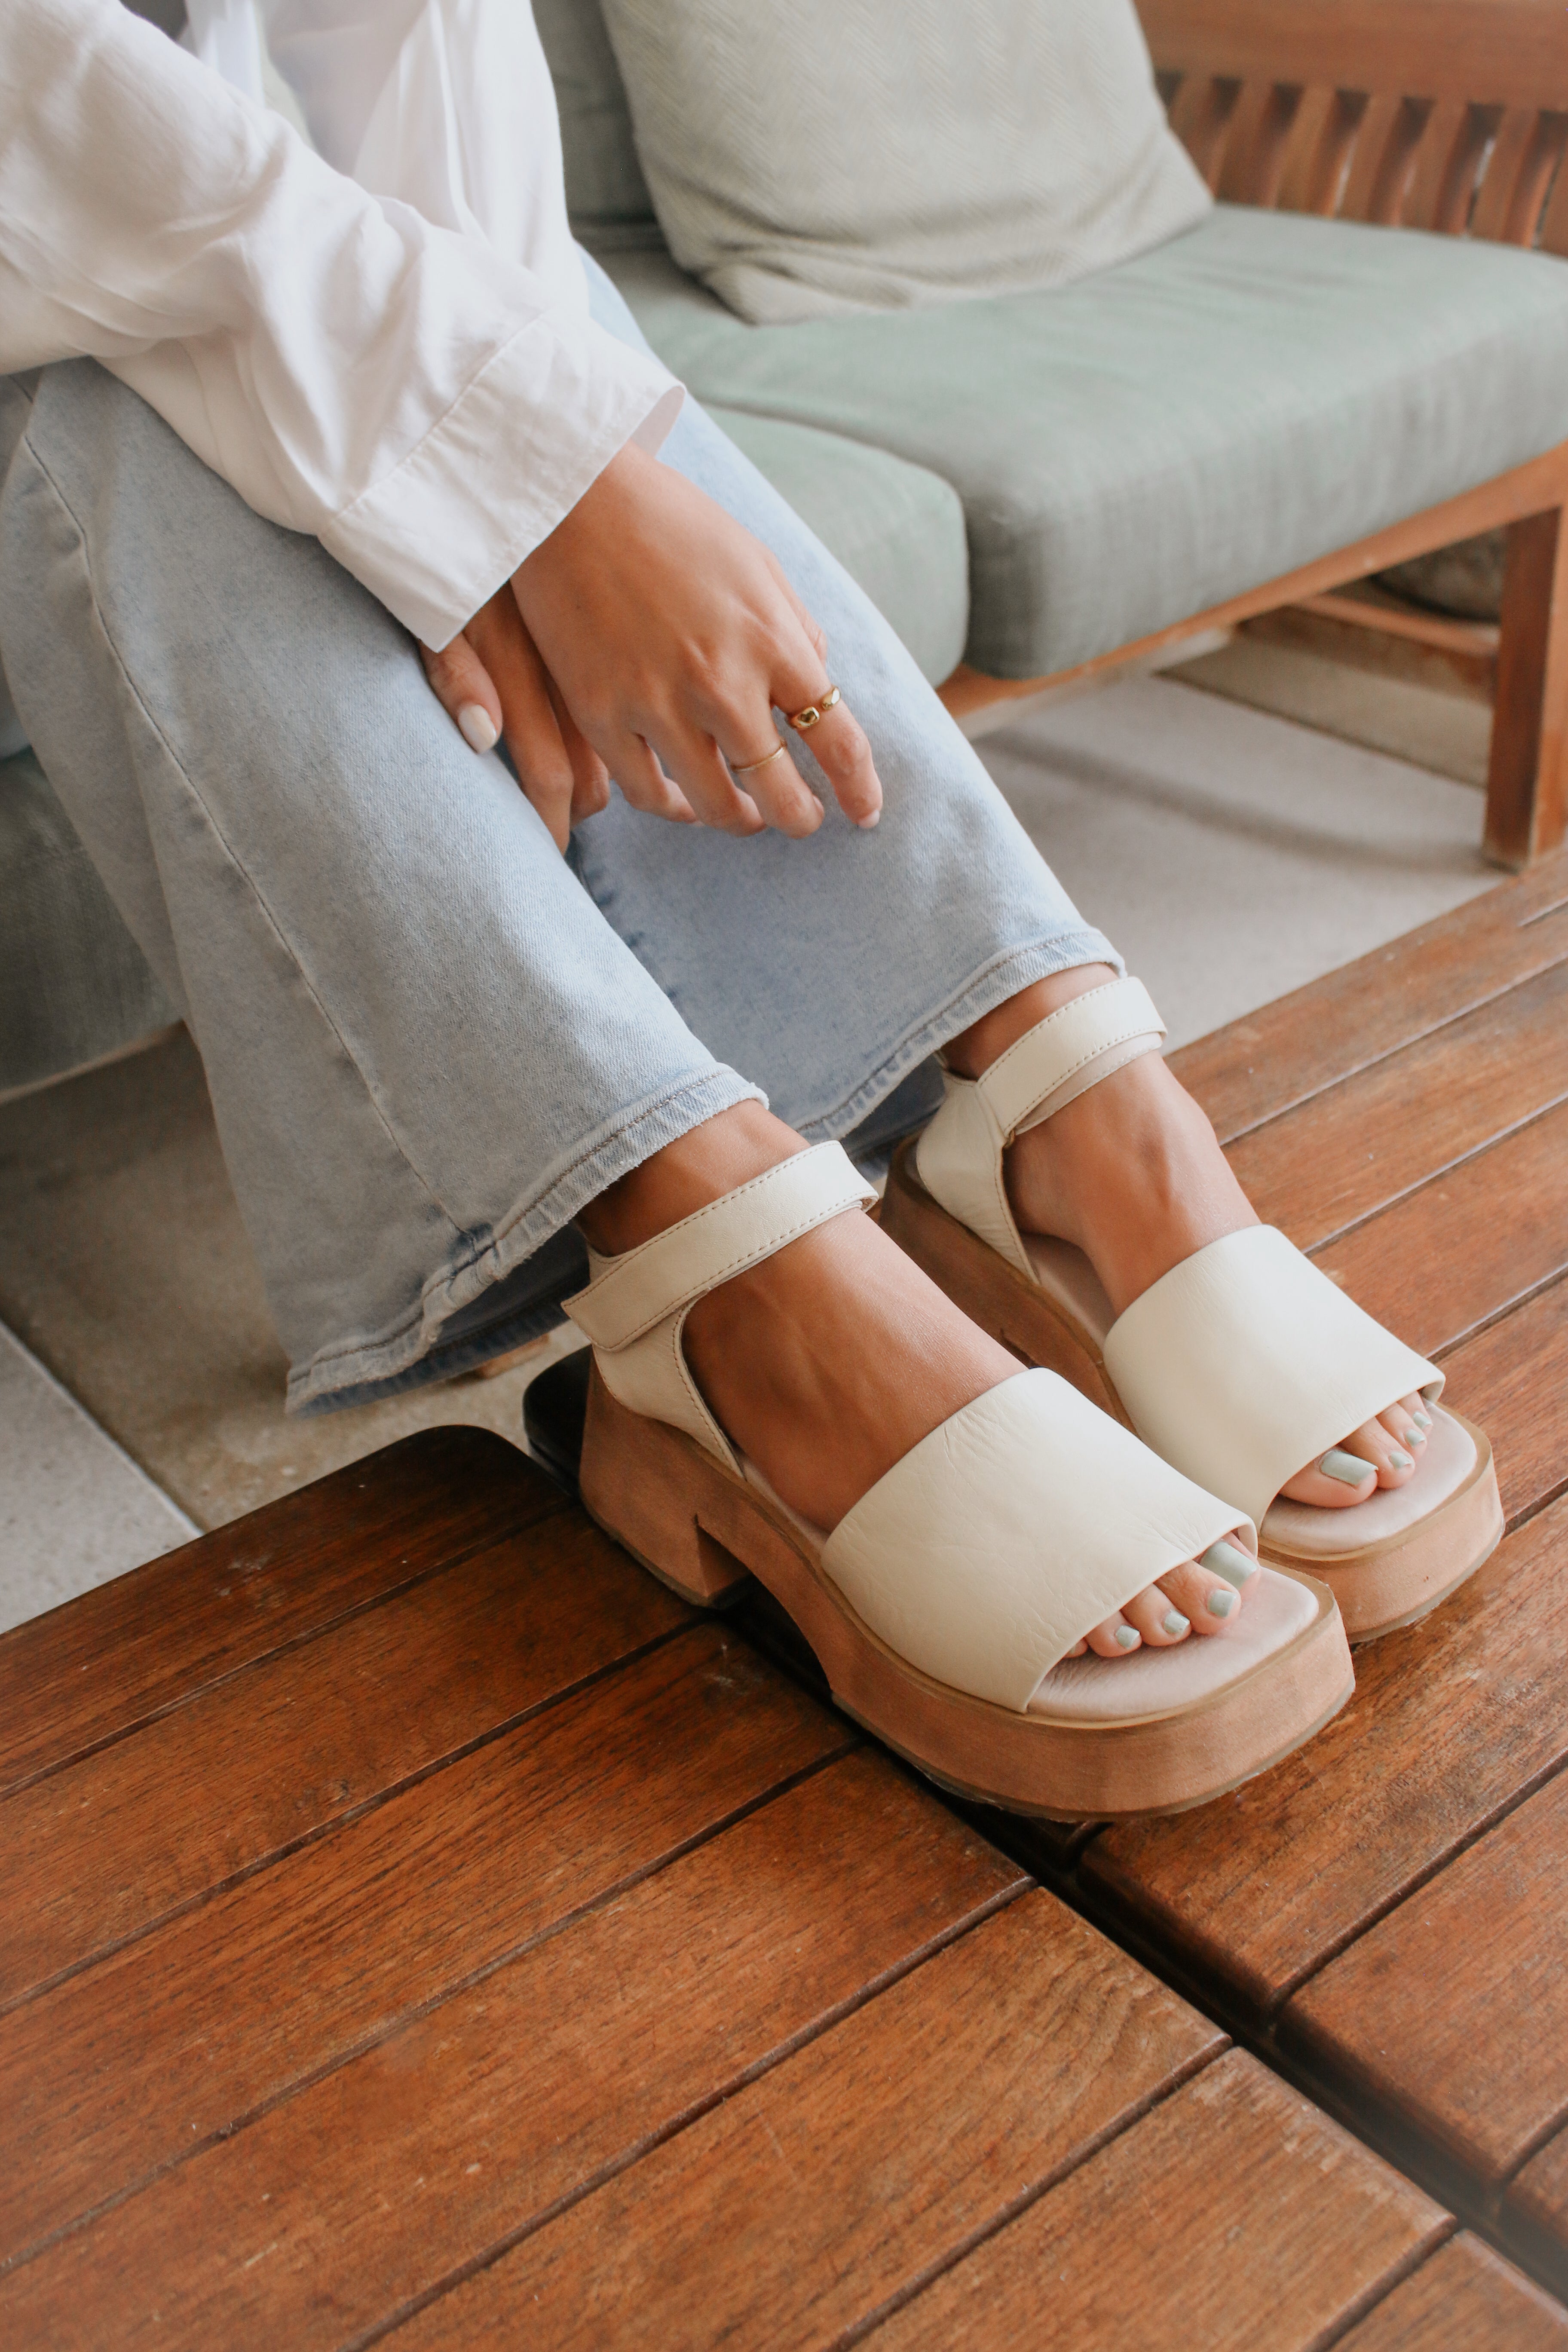 Tribe_Lifestyle_sandals_beach_wear_ethical_handcrafted_womens_footwear_leather_summer_beach_aesthetic_nyc_6